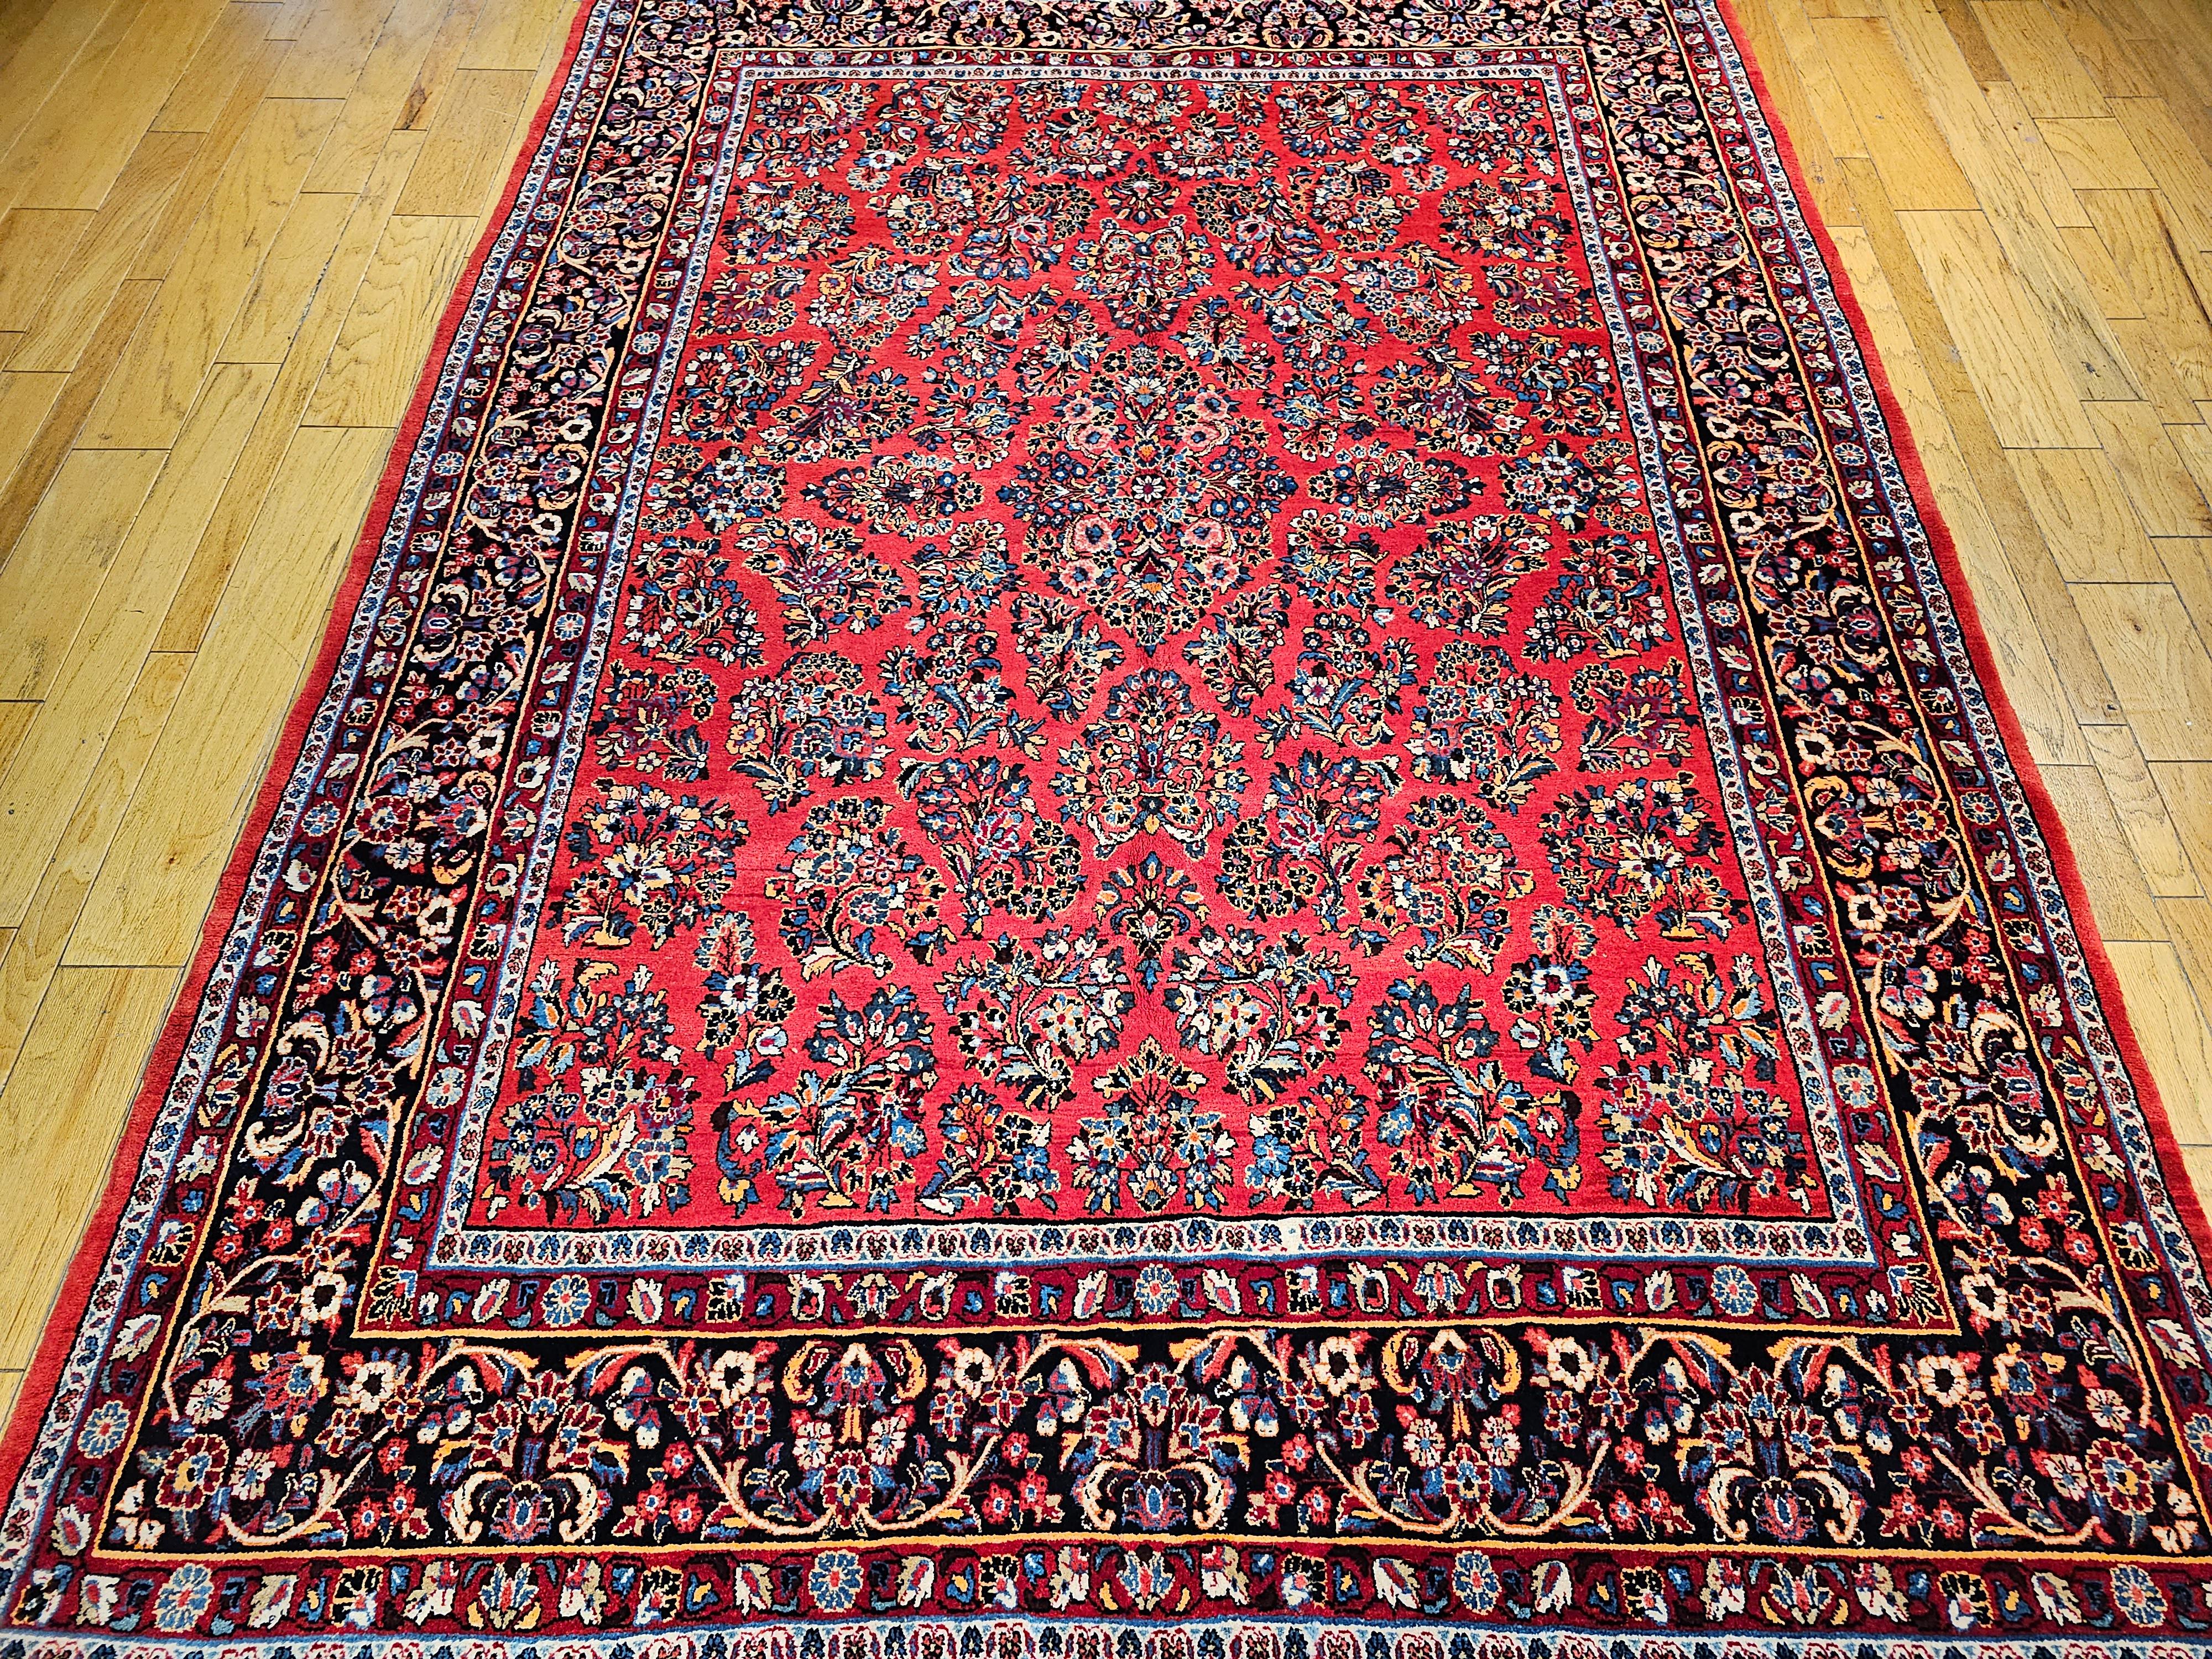 A near square size Persian Sarouk room size rug with an 